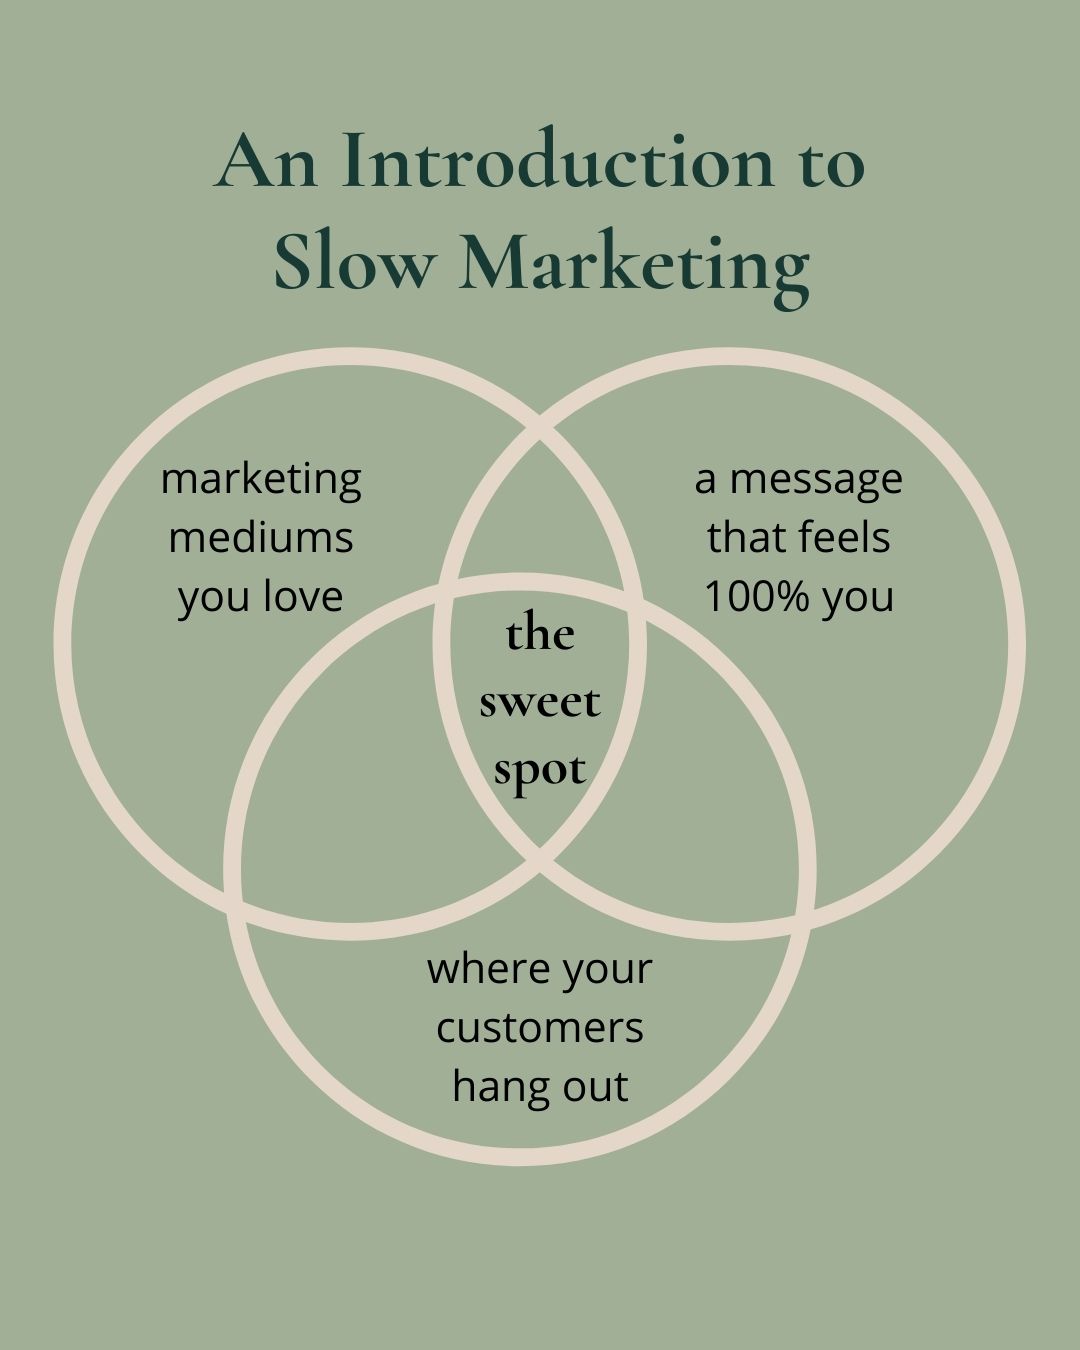 An introduction to slow marketing graphic